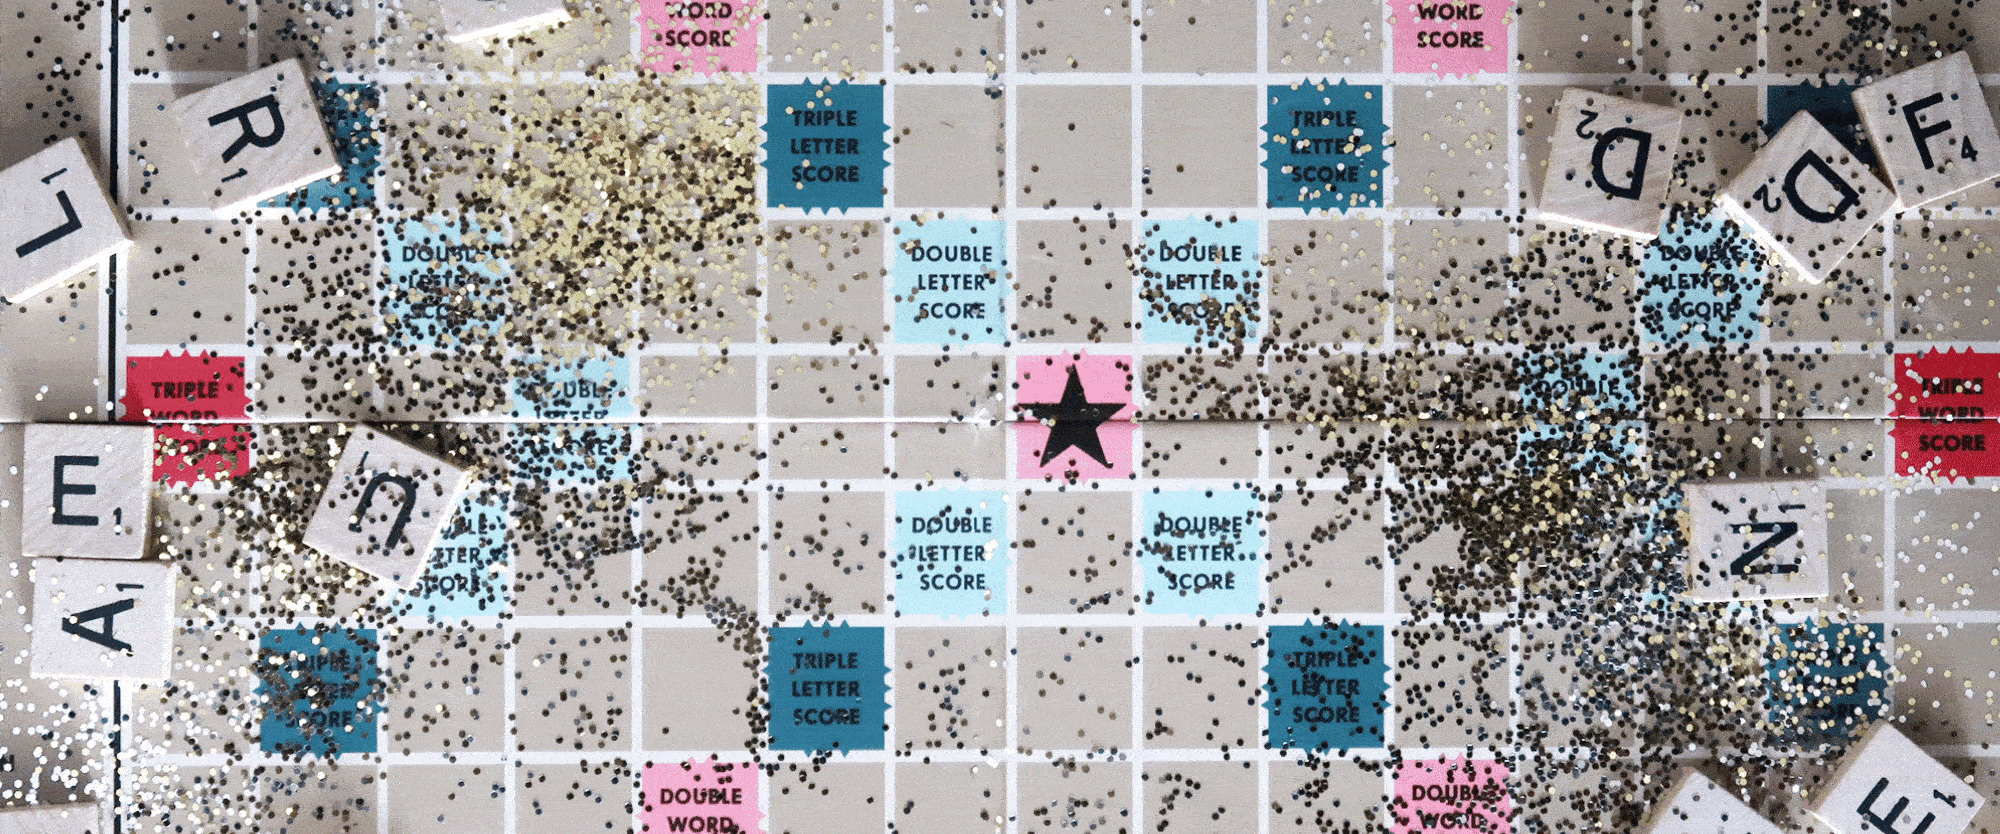 Animated GIF showing a Scrabble board with glitter and letters scattered on it. The words "Year in Review" are placed on the board.